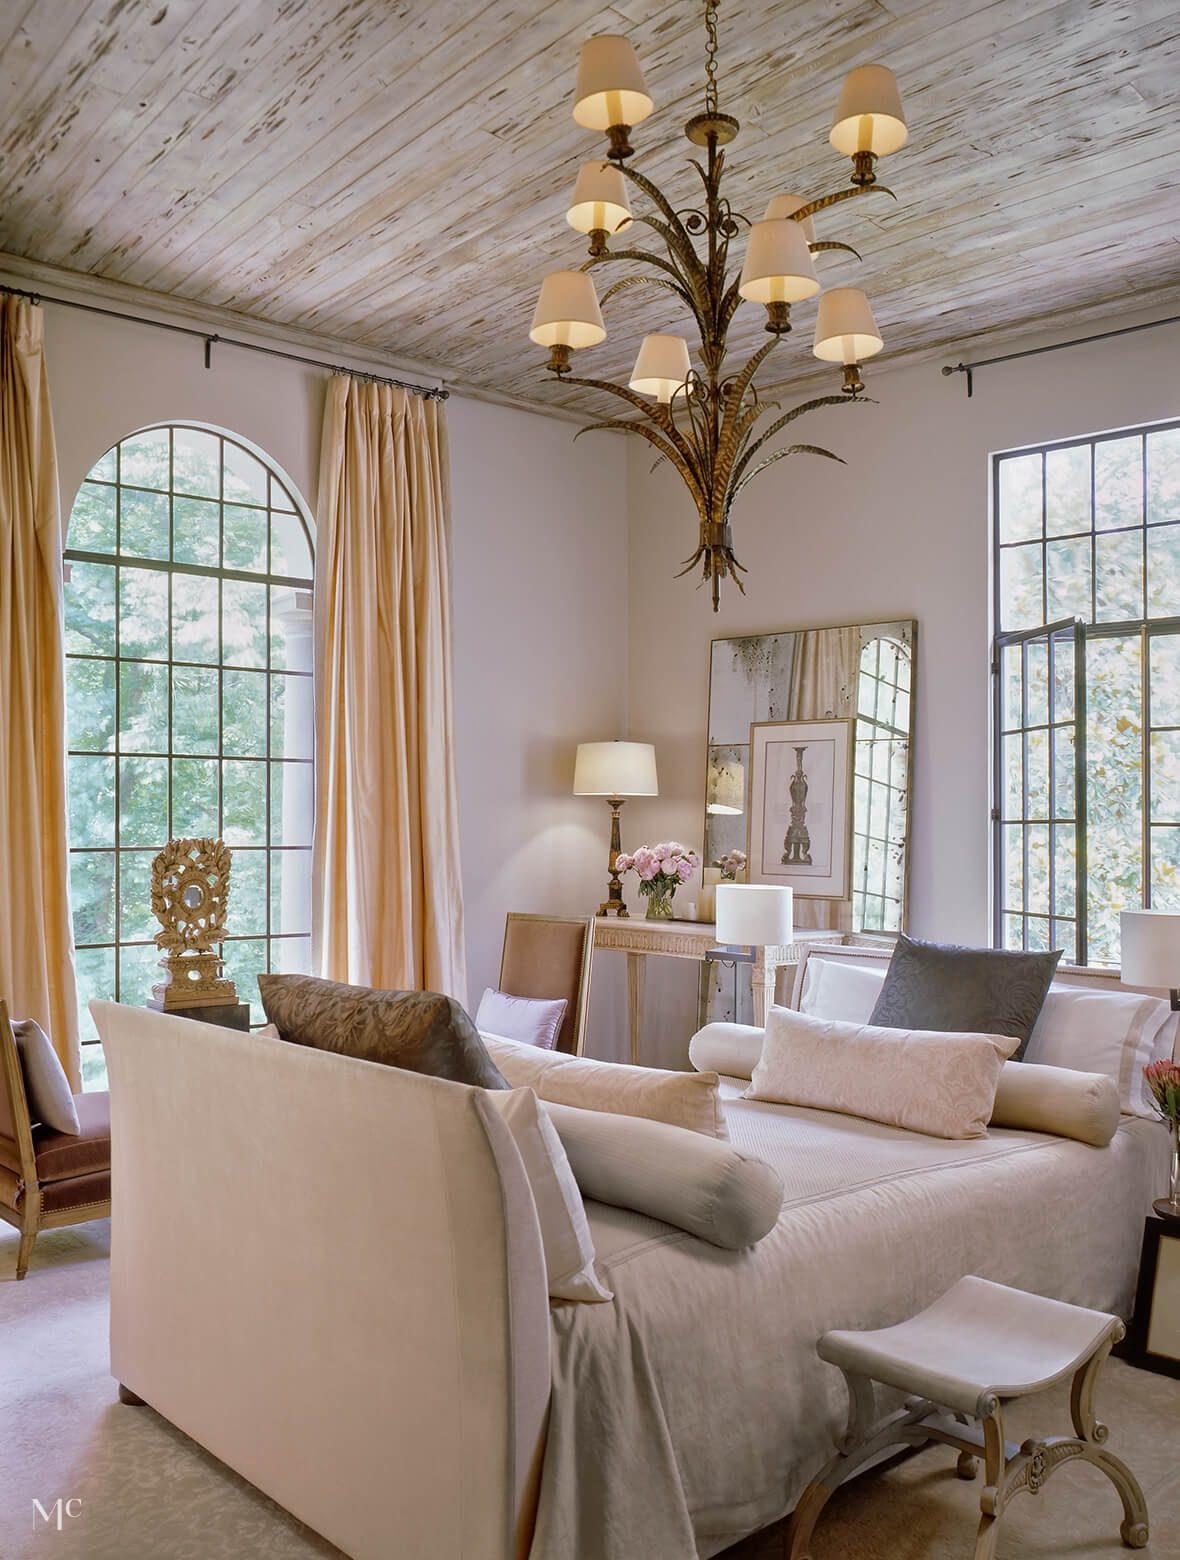 Décor Inspiration | Classic Romance: Old Meets New in this Nashville Home